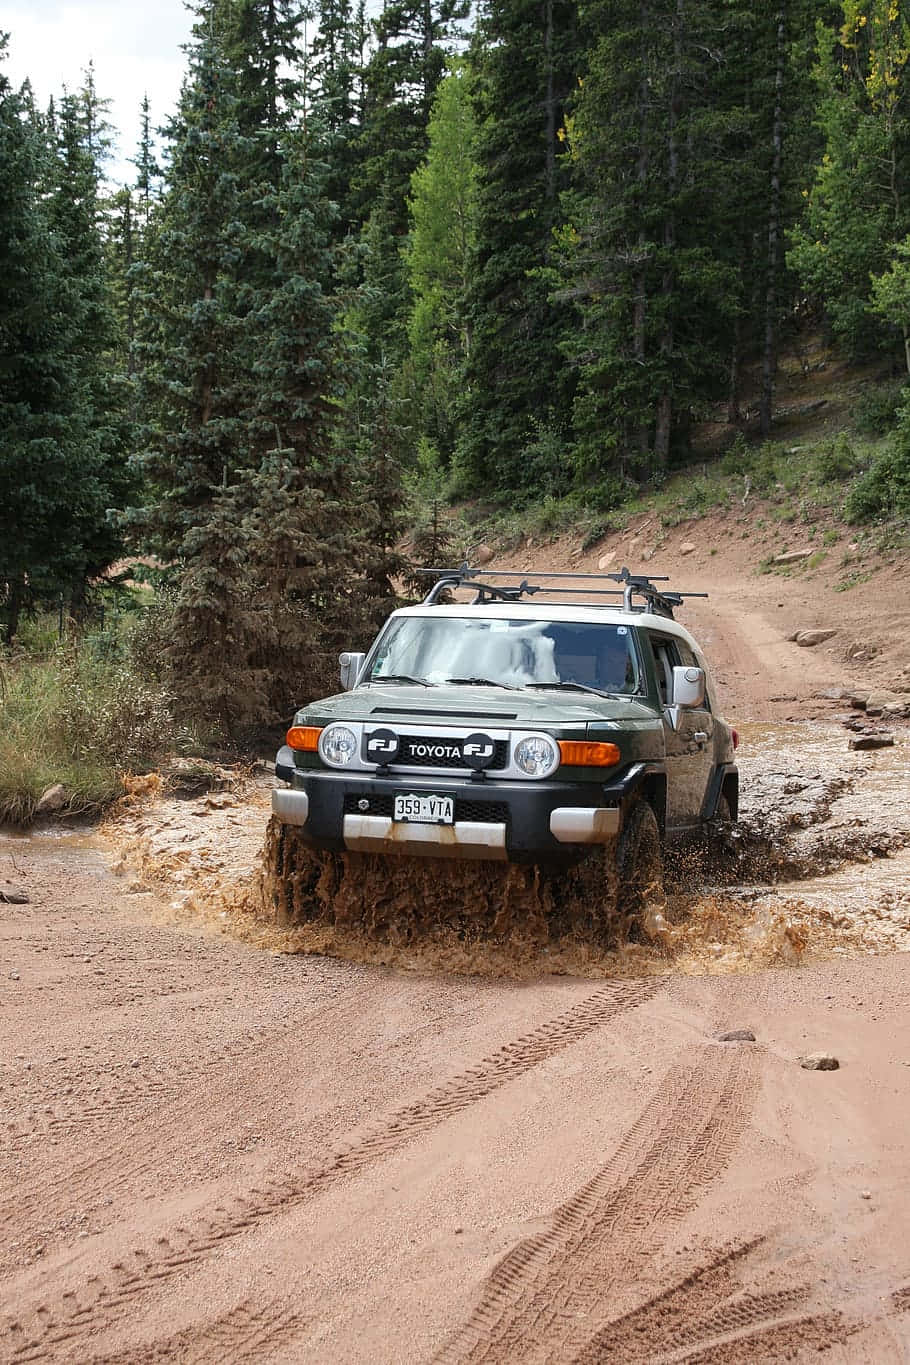 Powerful Toyota Land Cruiser Dominating The Landscape Wallpaper